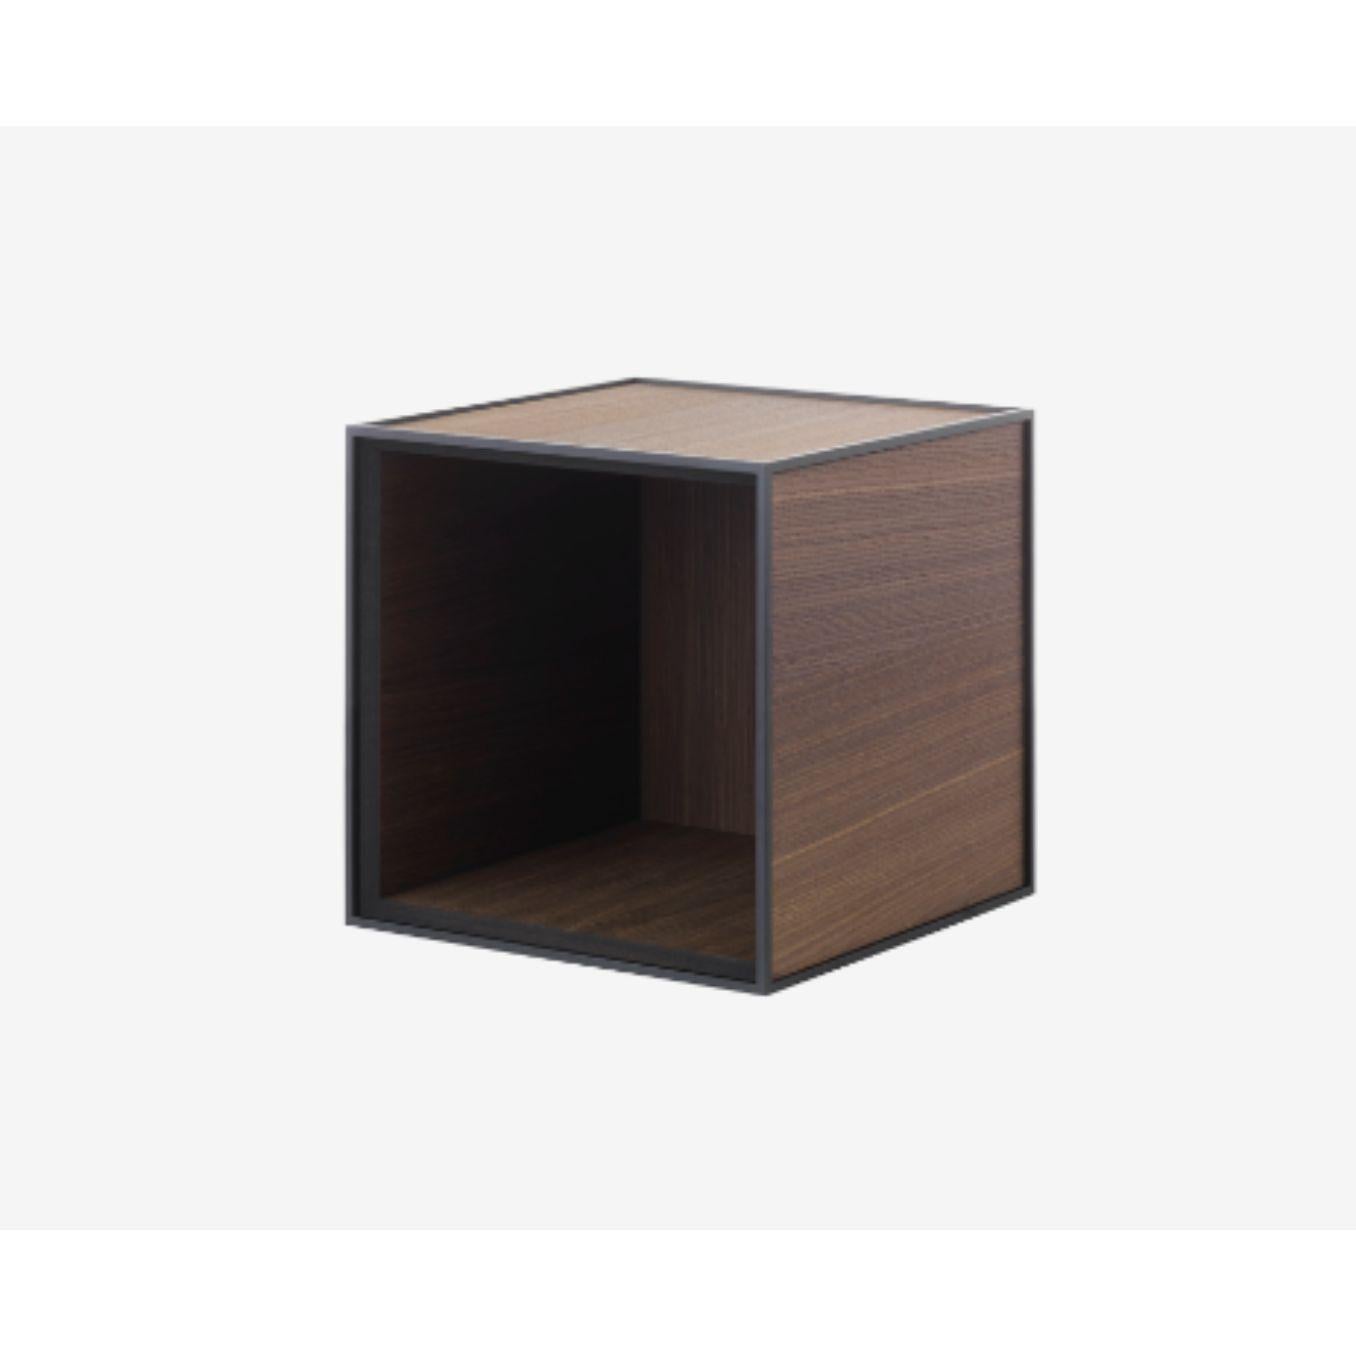 28 smoked Oak frame box by Lassen
Dimensions: W 28 x D 28 x H 28 cm 
Materials: Finér, Melamin, Melamin, Melamine, Metal, Veneer, Oak
Also available in different colors and dimensions.

By Lassen is a Danish design brand focused on iconic